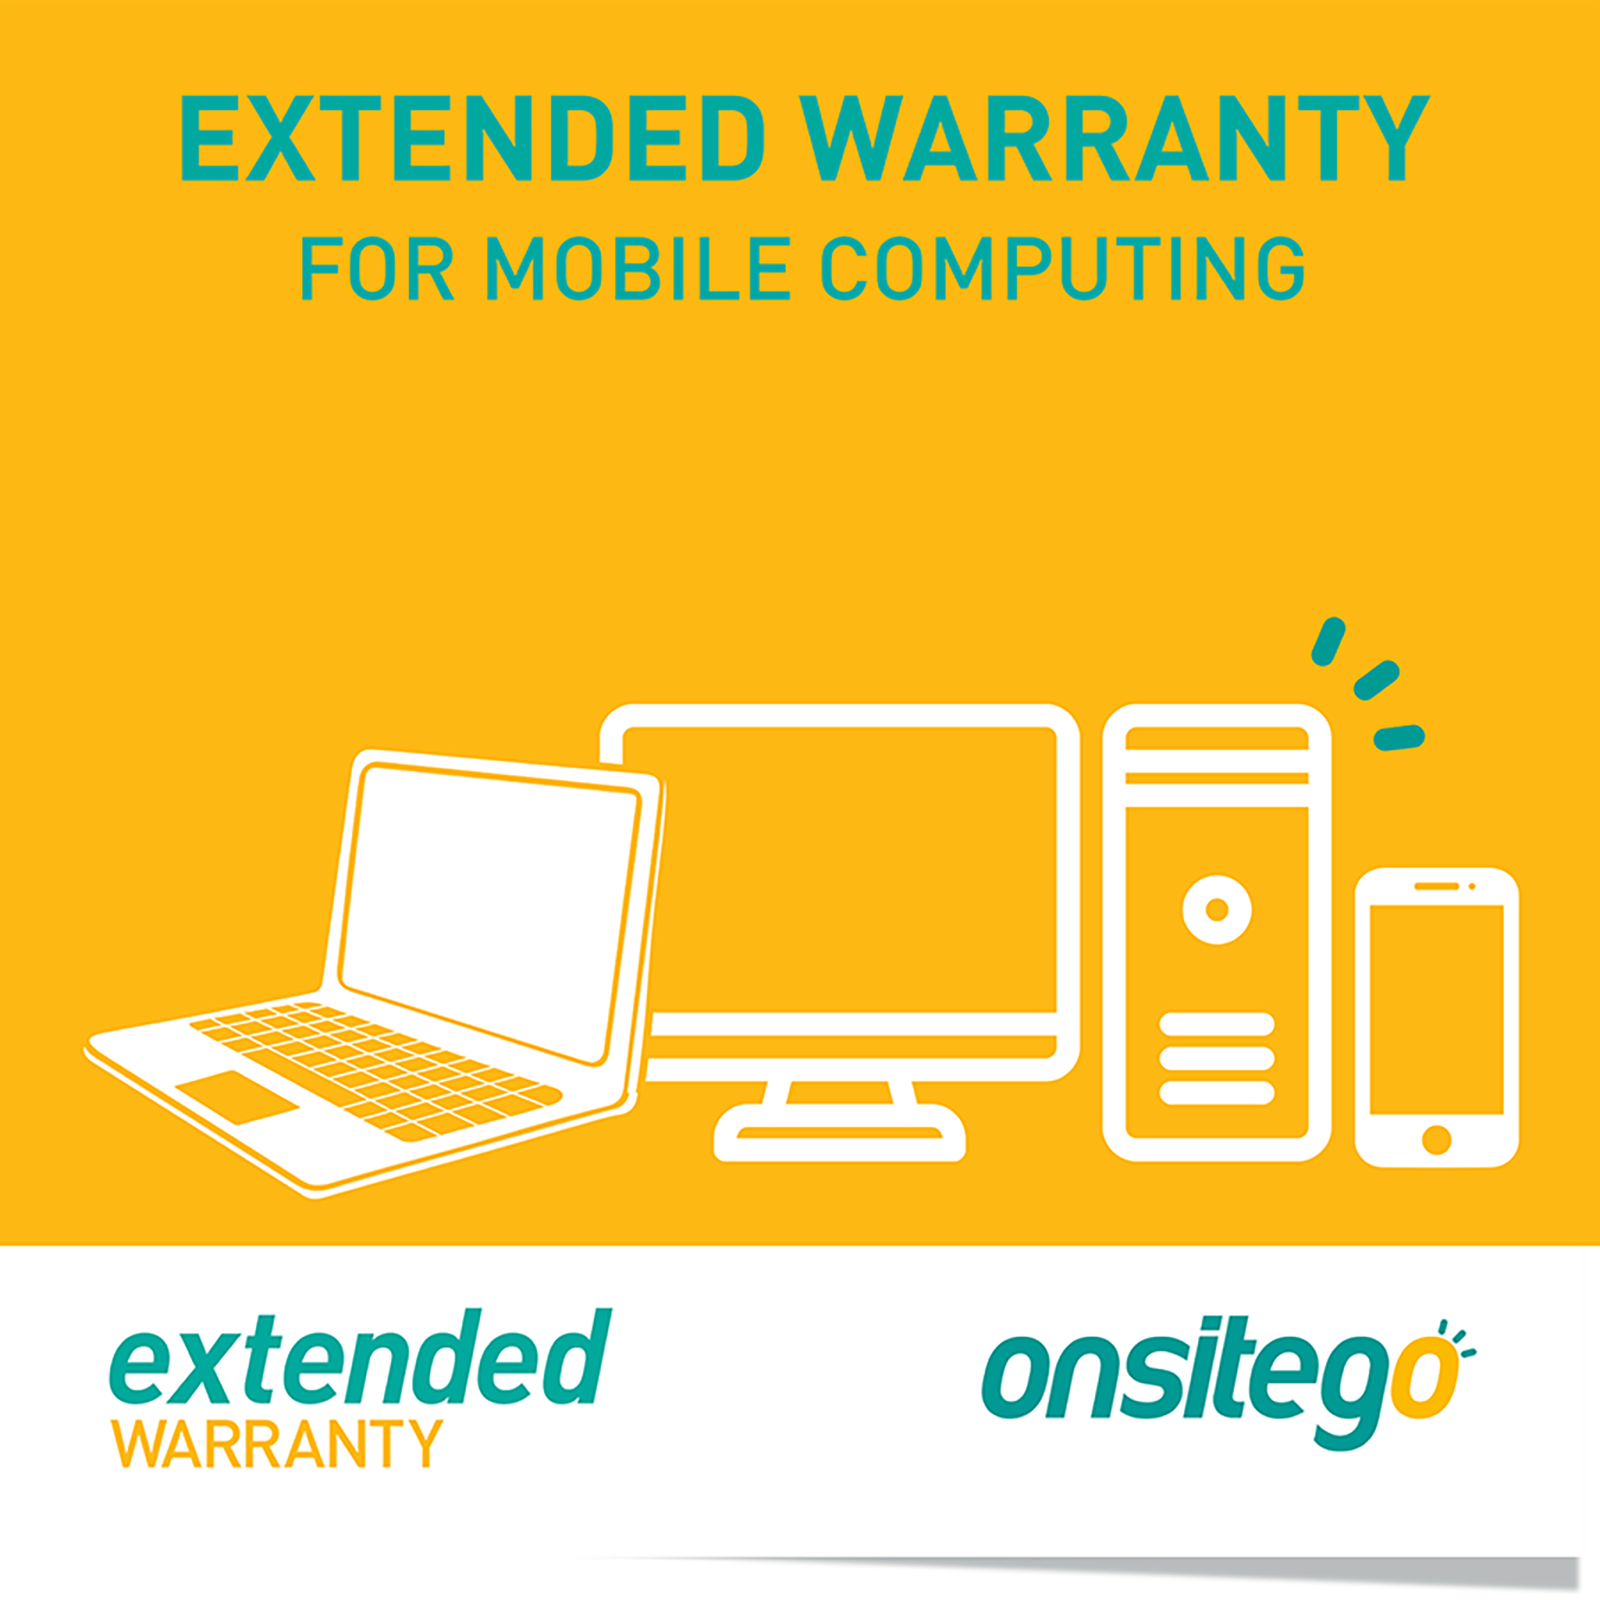 Onsitego 1 Year Extended Warranty for Laptop (Rs.70,000 - Rs.100,000)_1